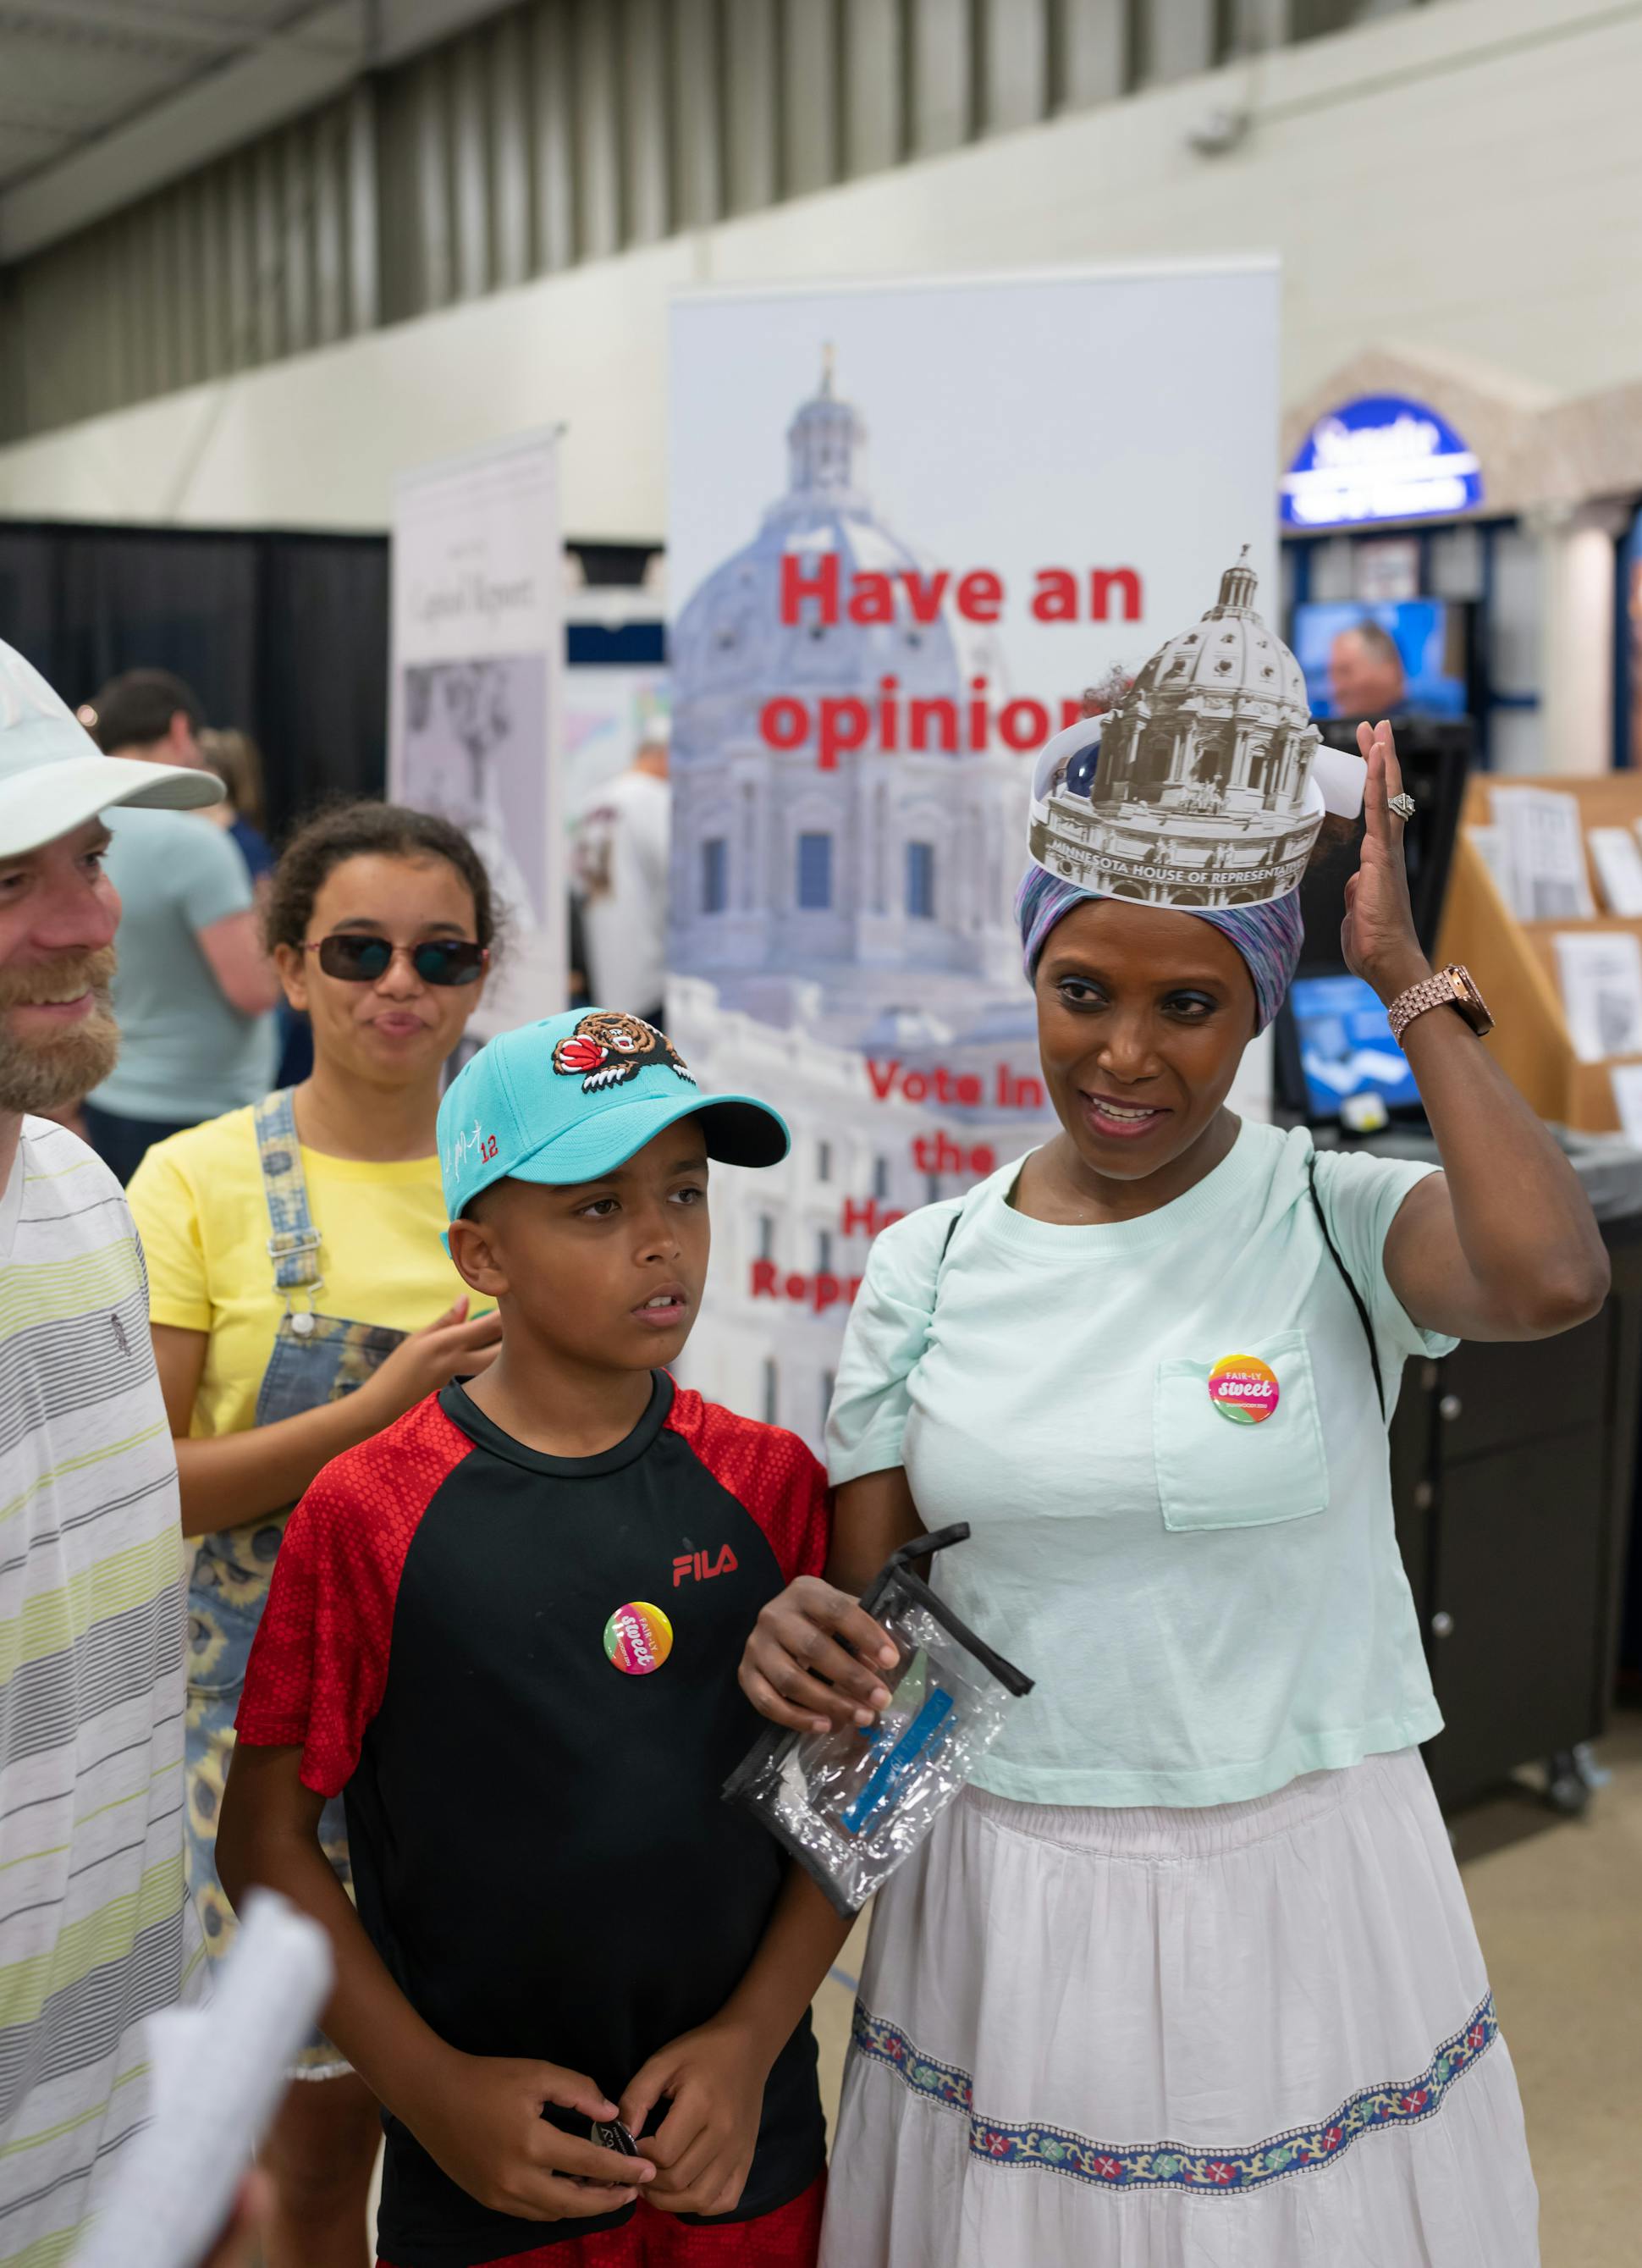 Tigist Opheim wore a Minnesota House of Representatives hat at the House display in the State Fair’s Education Building. She visited the exhibit on Aug. 26 with her husband, Tom, left, and their two children, Tinsae, 14, and Tommy, 10.